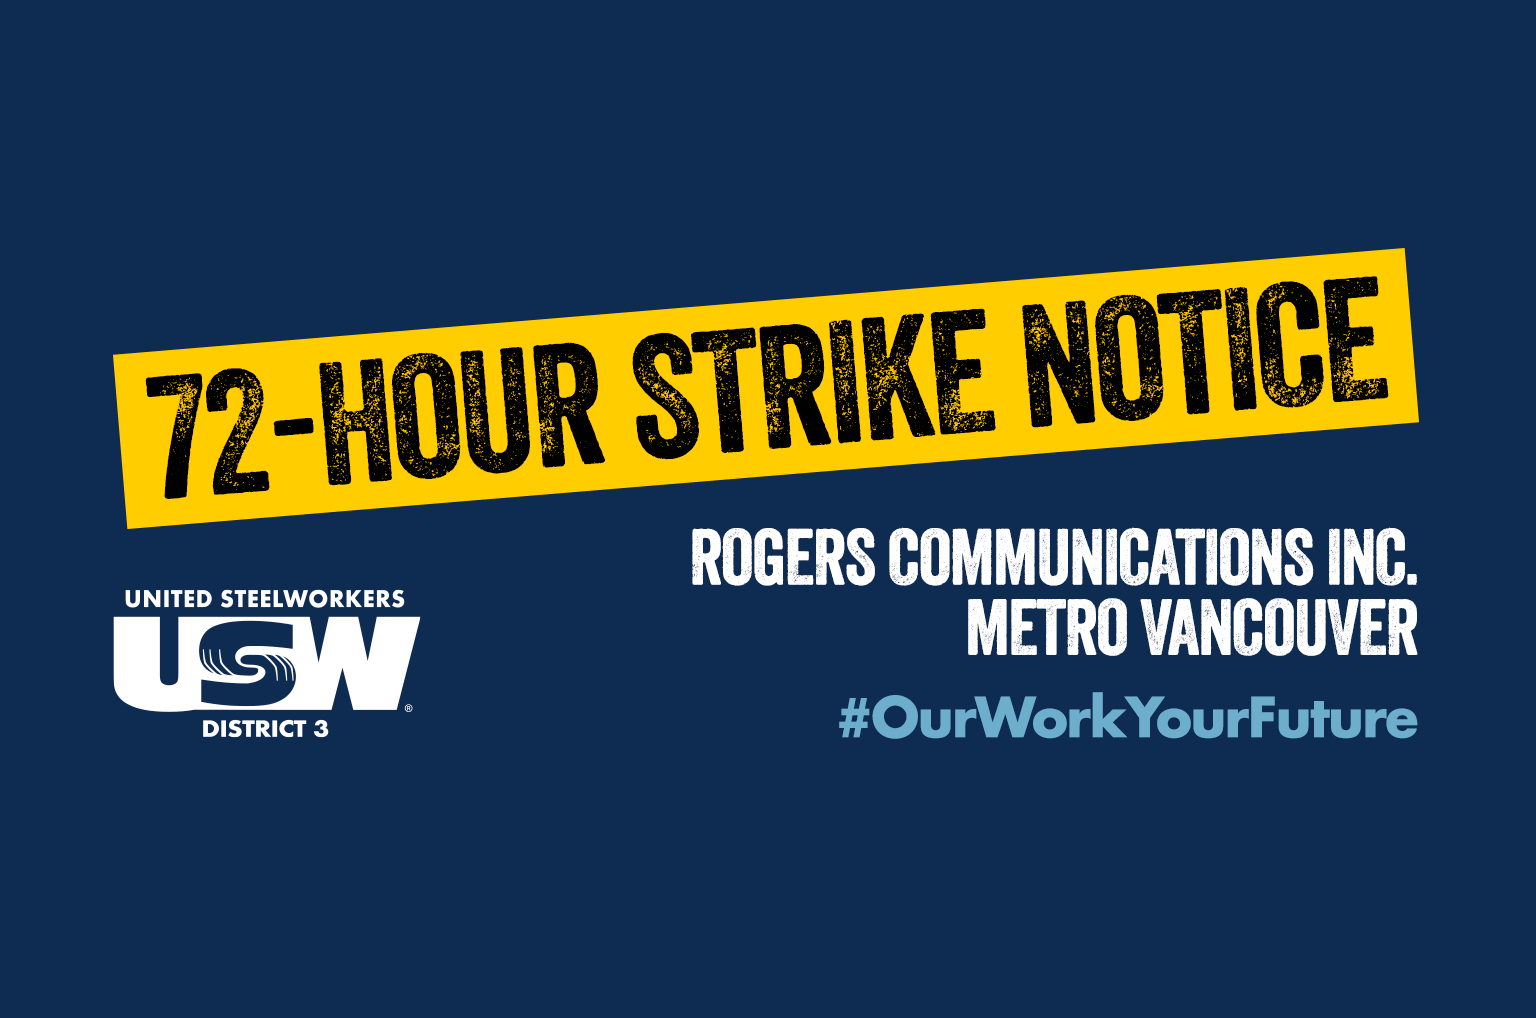 72-Hour Strike Notice for Rogers Communications Inc. in Metro Vancouver. #OurWorkYourFuture